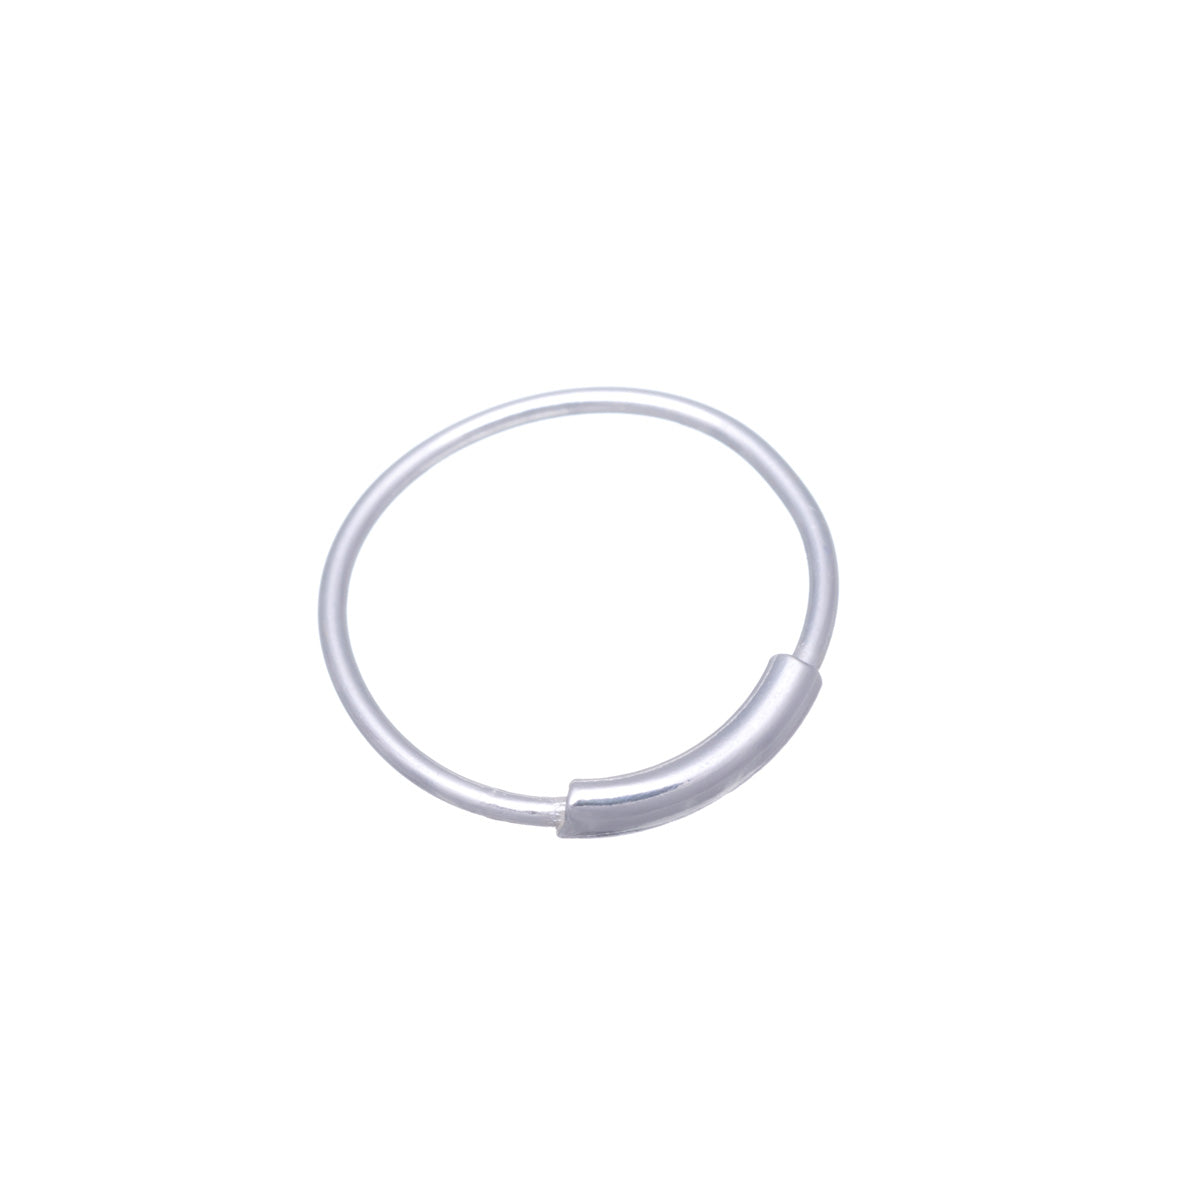 Silver nose ring nose ring 0,65mm 9mm (Silver 925)